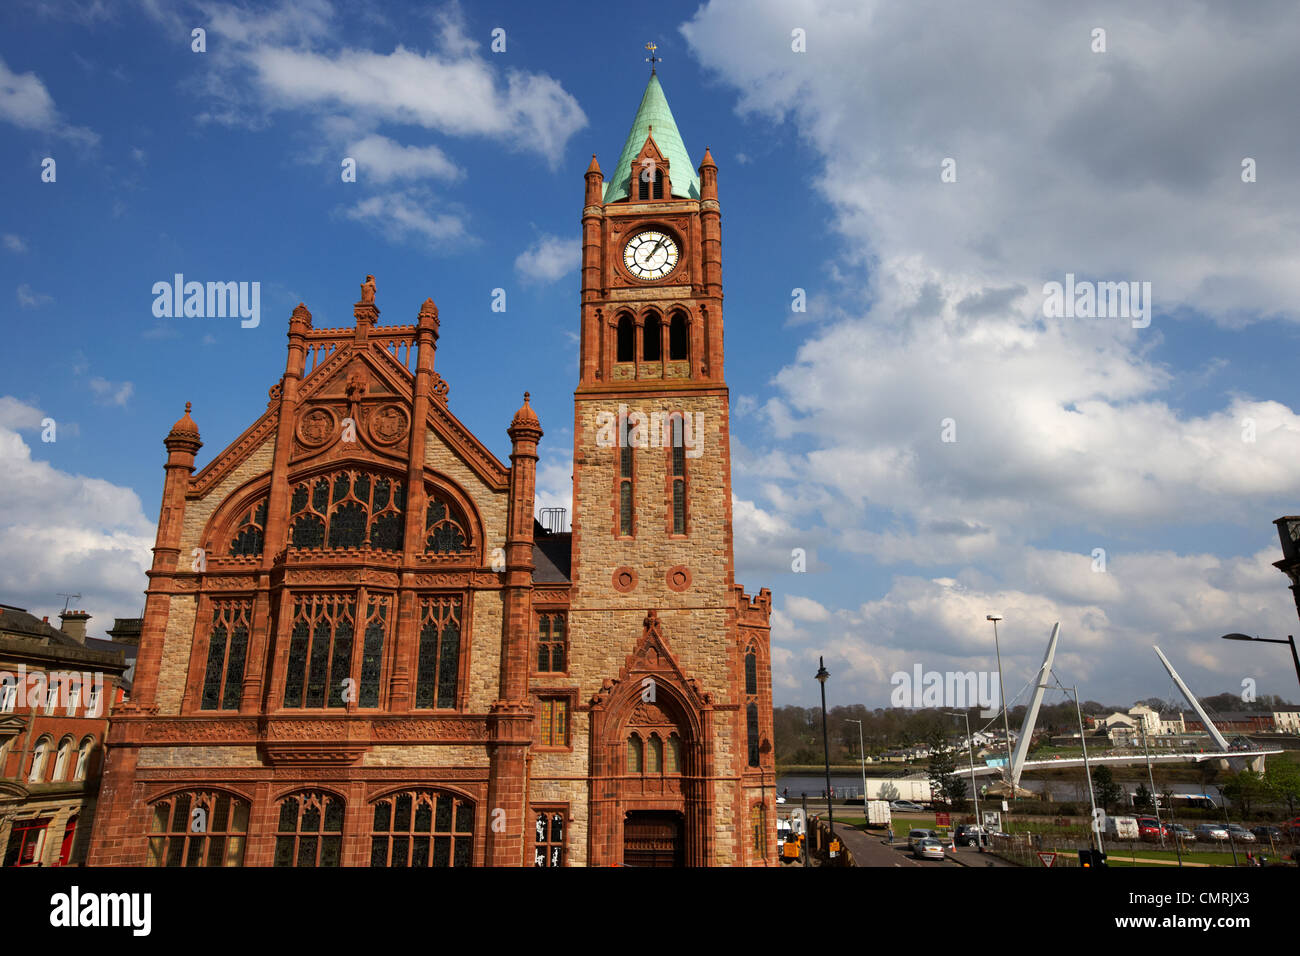 The Guildhall and new peace bridge Derry city county londonderry northern ireland uk. Stock Photo